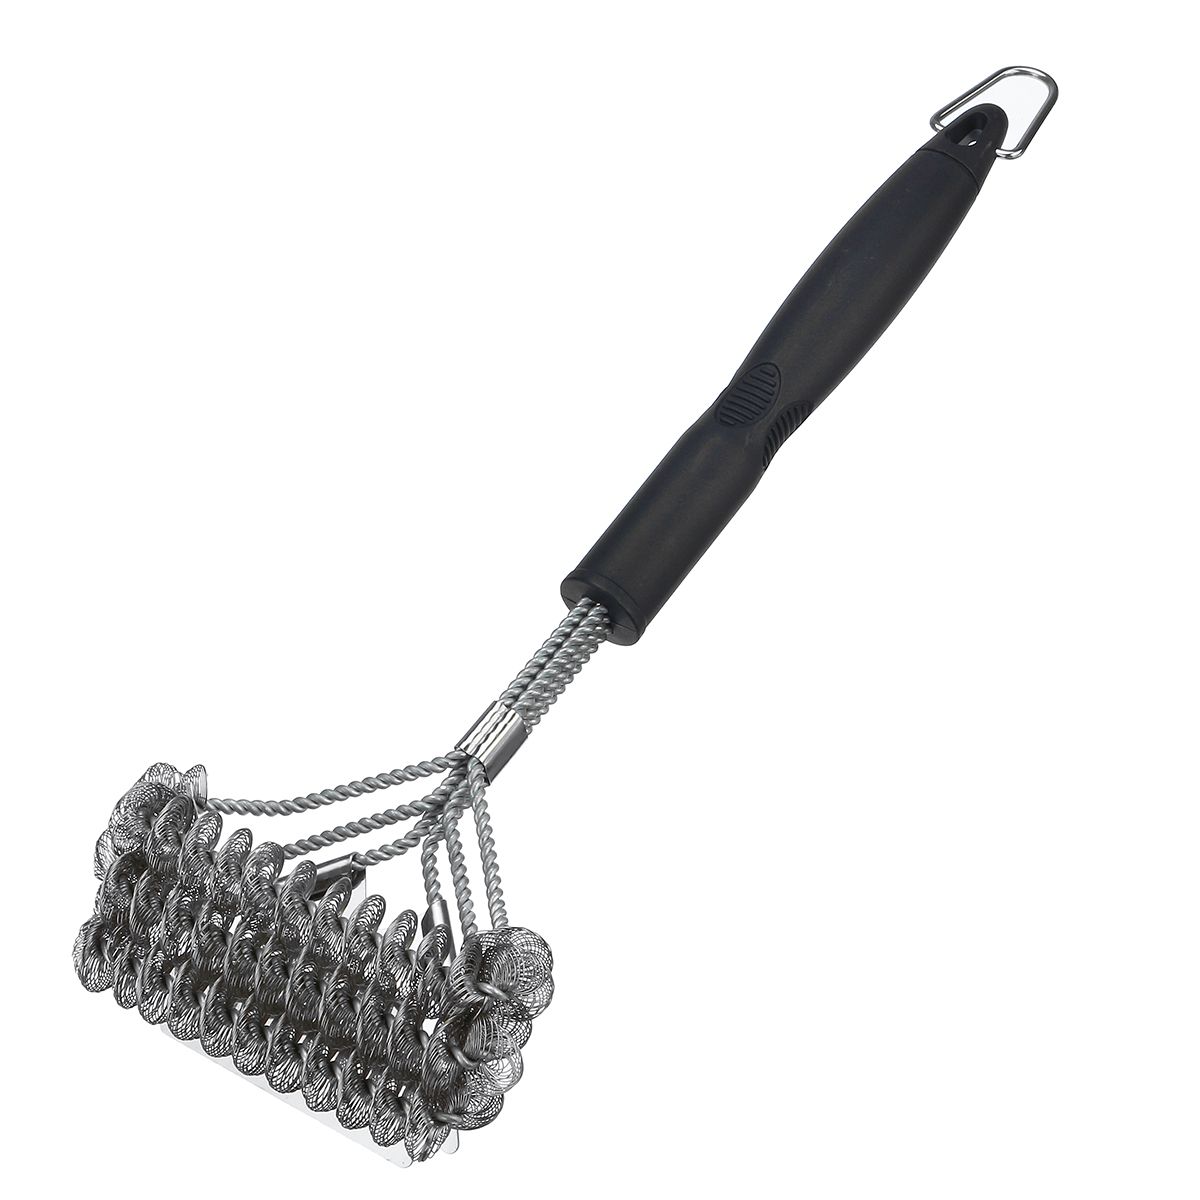 18-Inch-Bristle-Free-Grill-Brush-Tool-Scraper-Brush-Stainless-for-Cleaning-BBQ-1687215